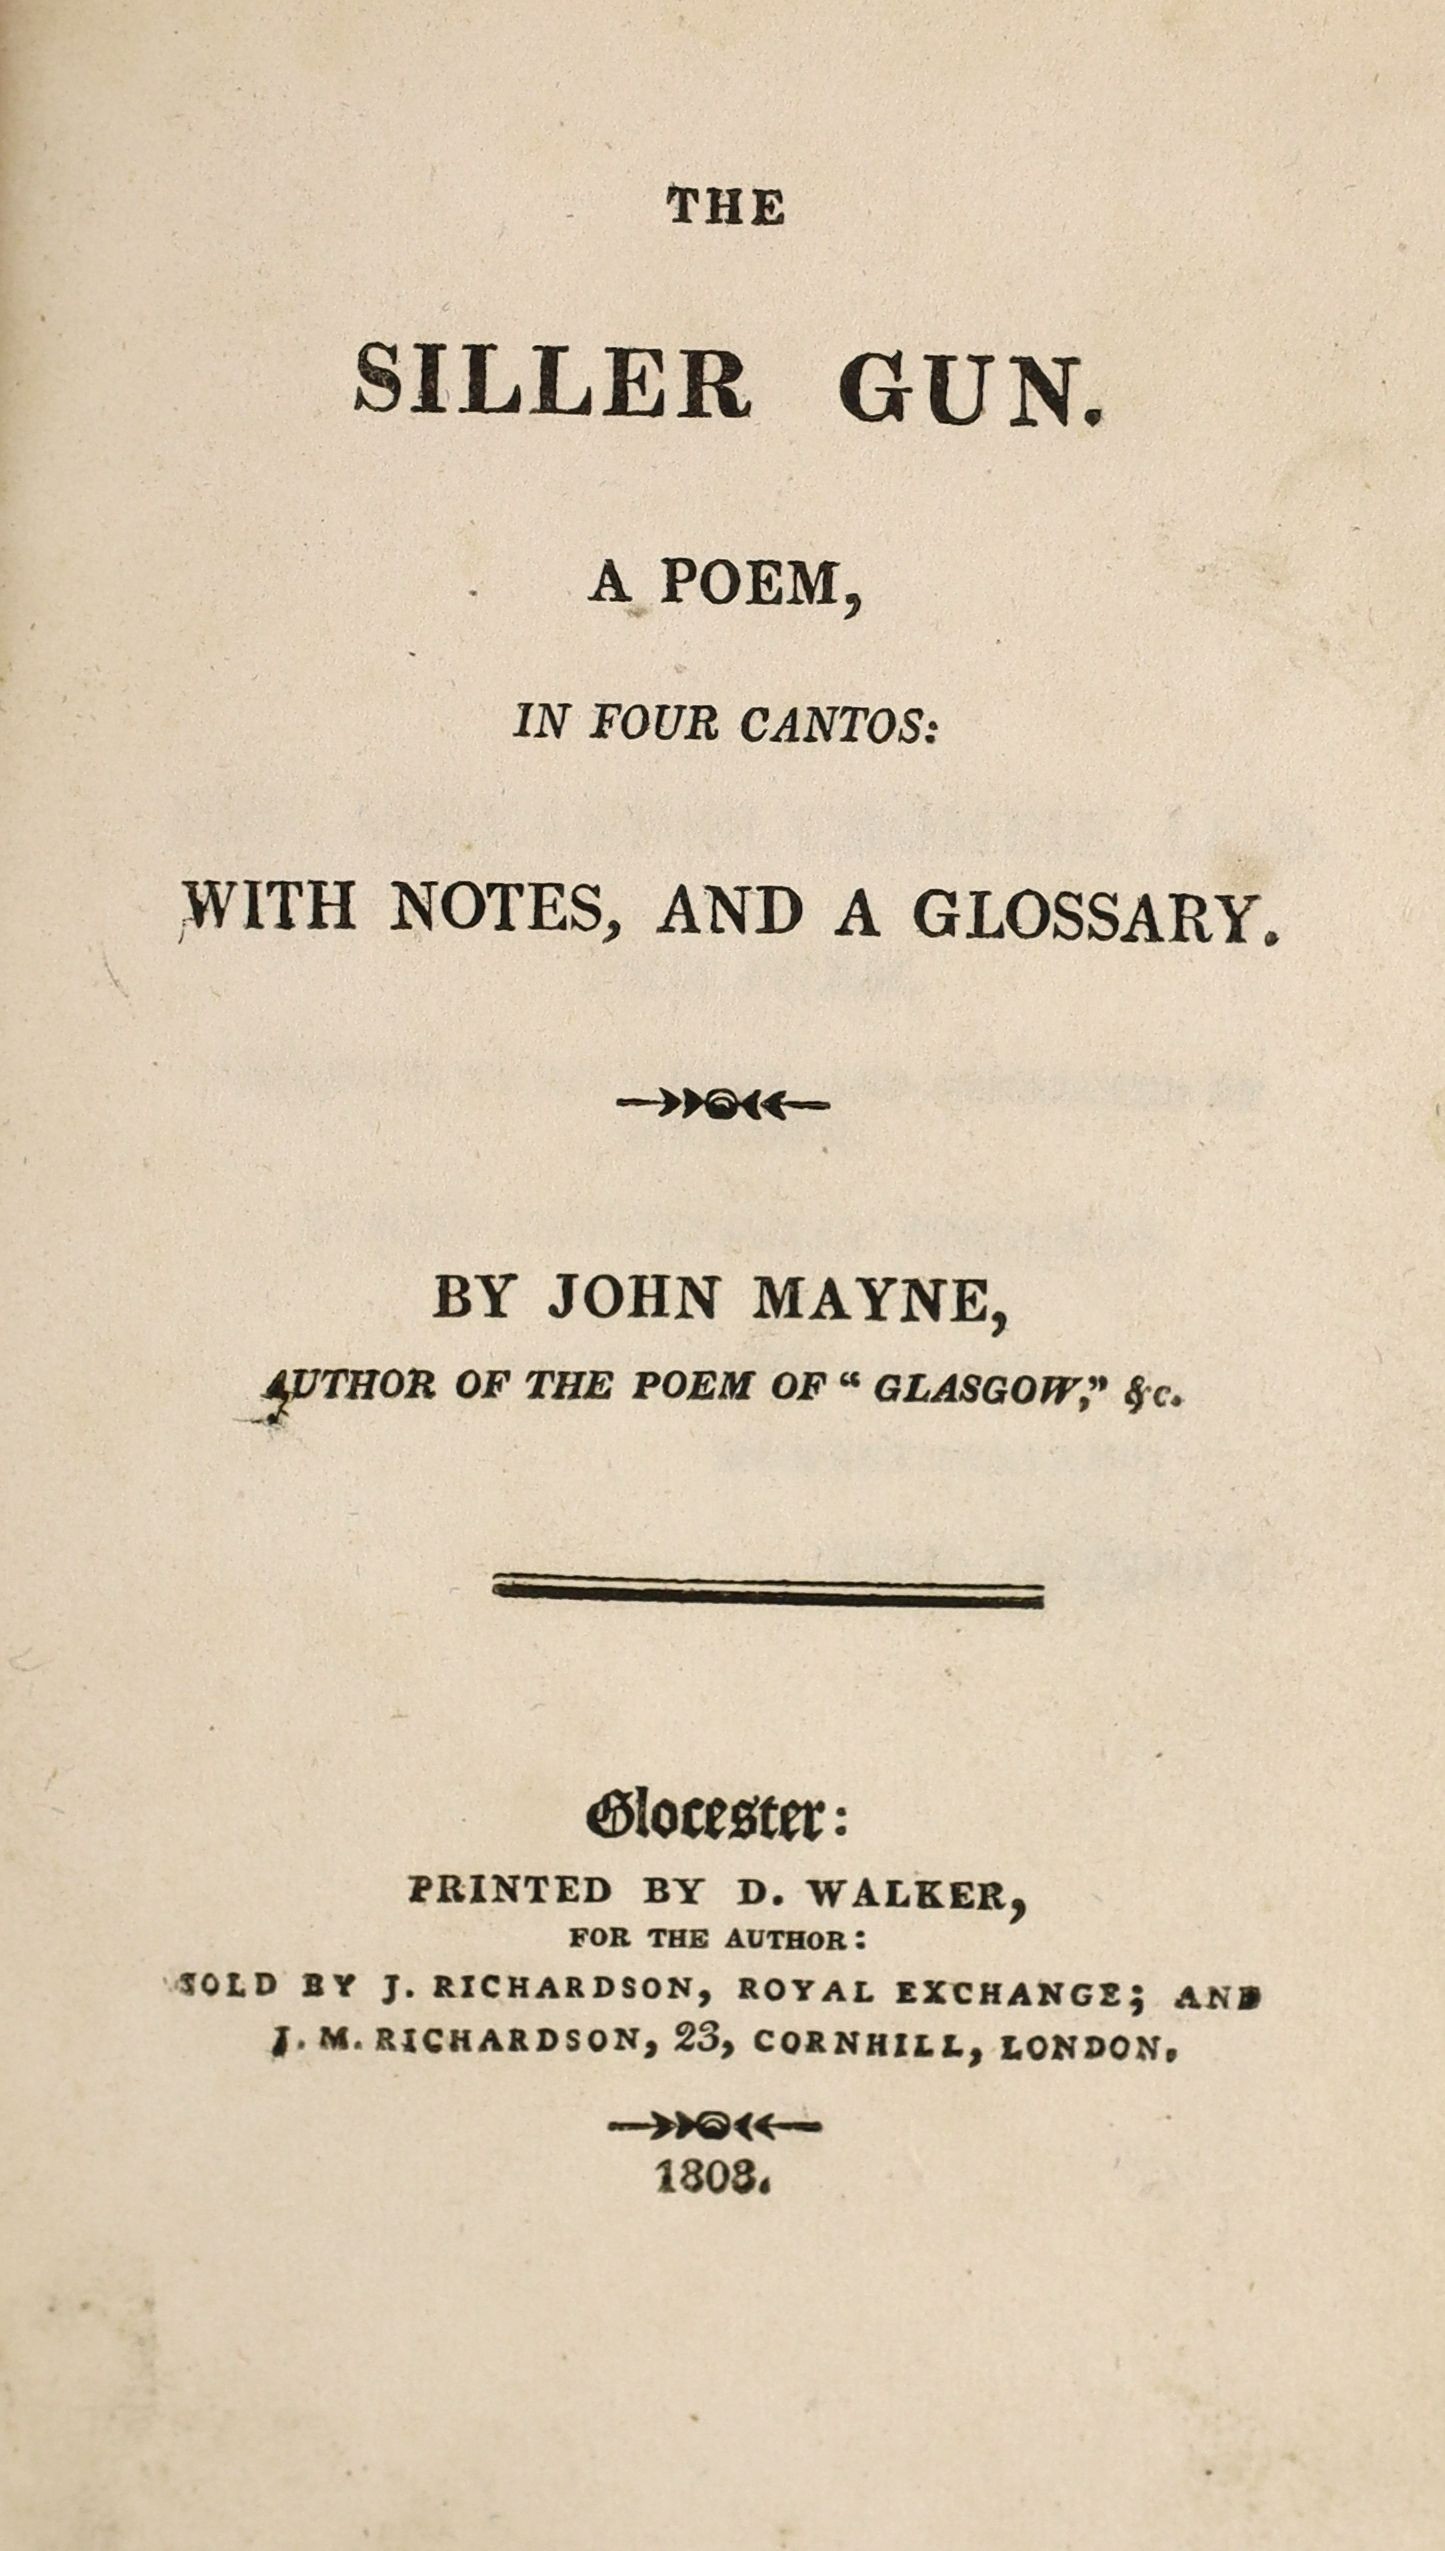 Mayne, John - The Siller Gun. A Poem, in Four Cantos, 8vo, paper boards, Thomas Cadell, London, Glocester [sic], 1808; [Lewis, Matthew Gregory] - Tales of Terror with Introductory Dialogue, 1st edition,  8vo, red moro...